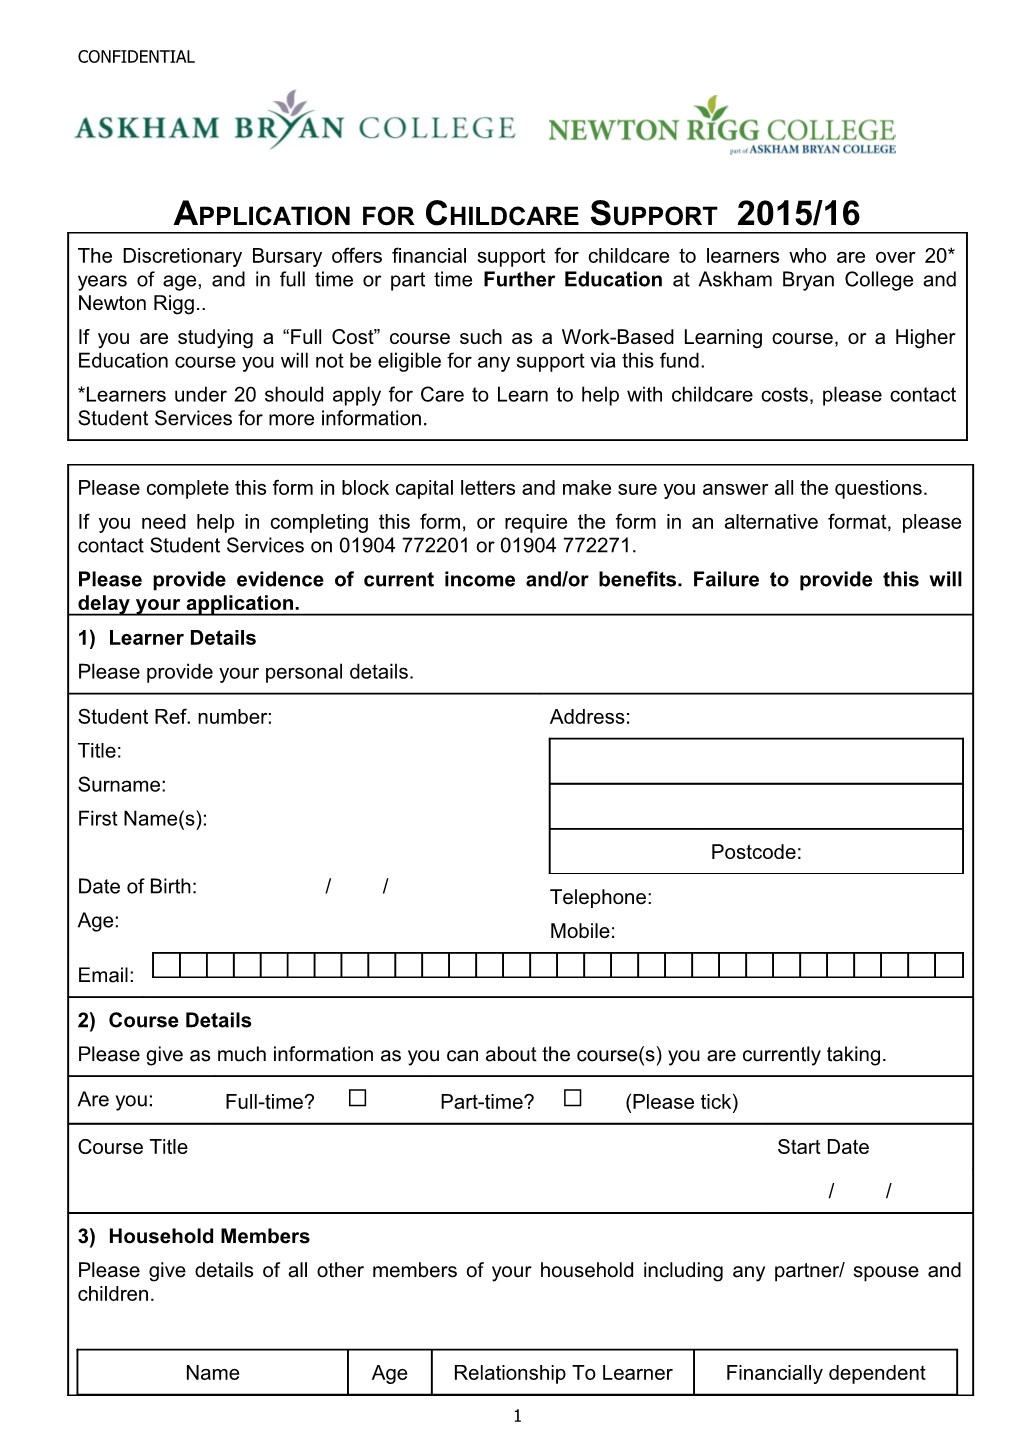 Application for Childcare Support 2015/16